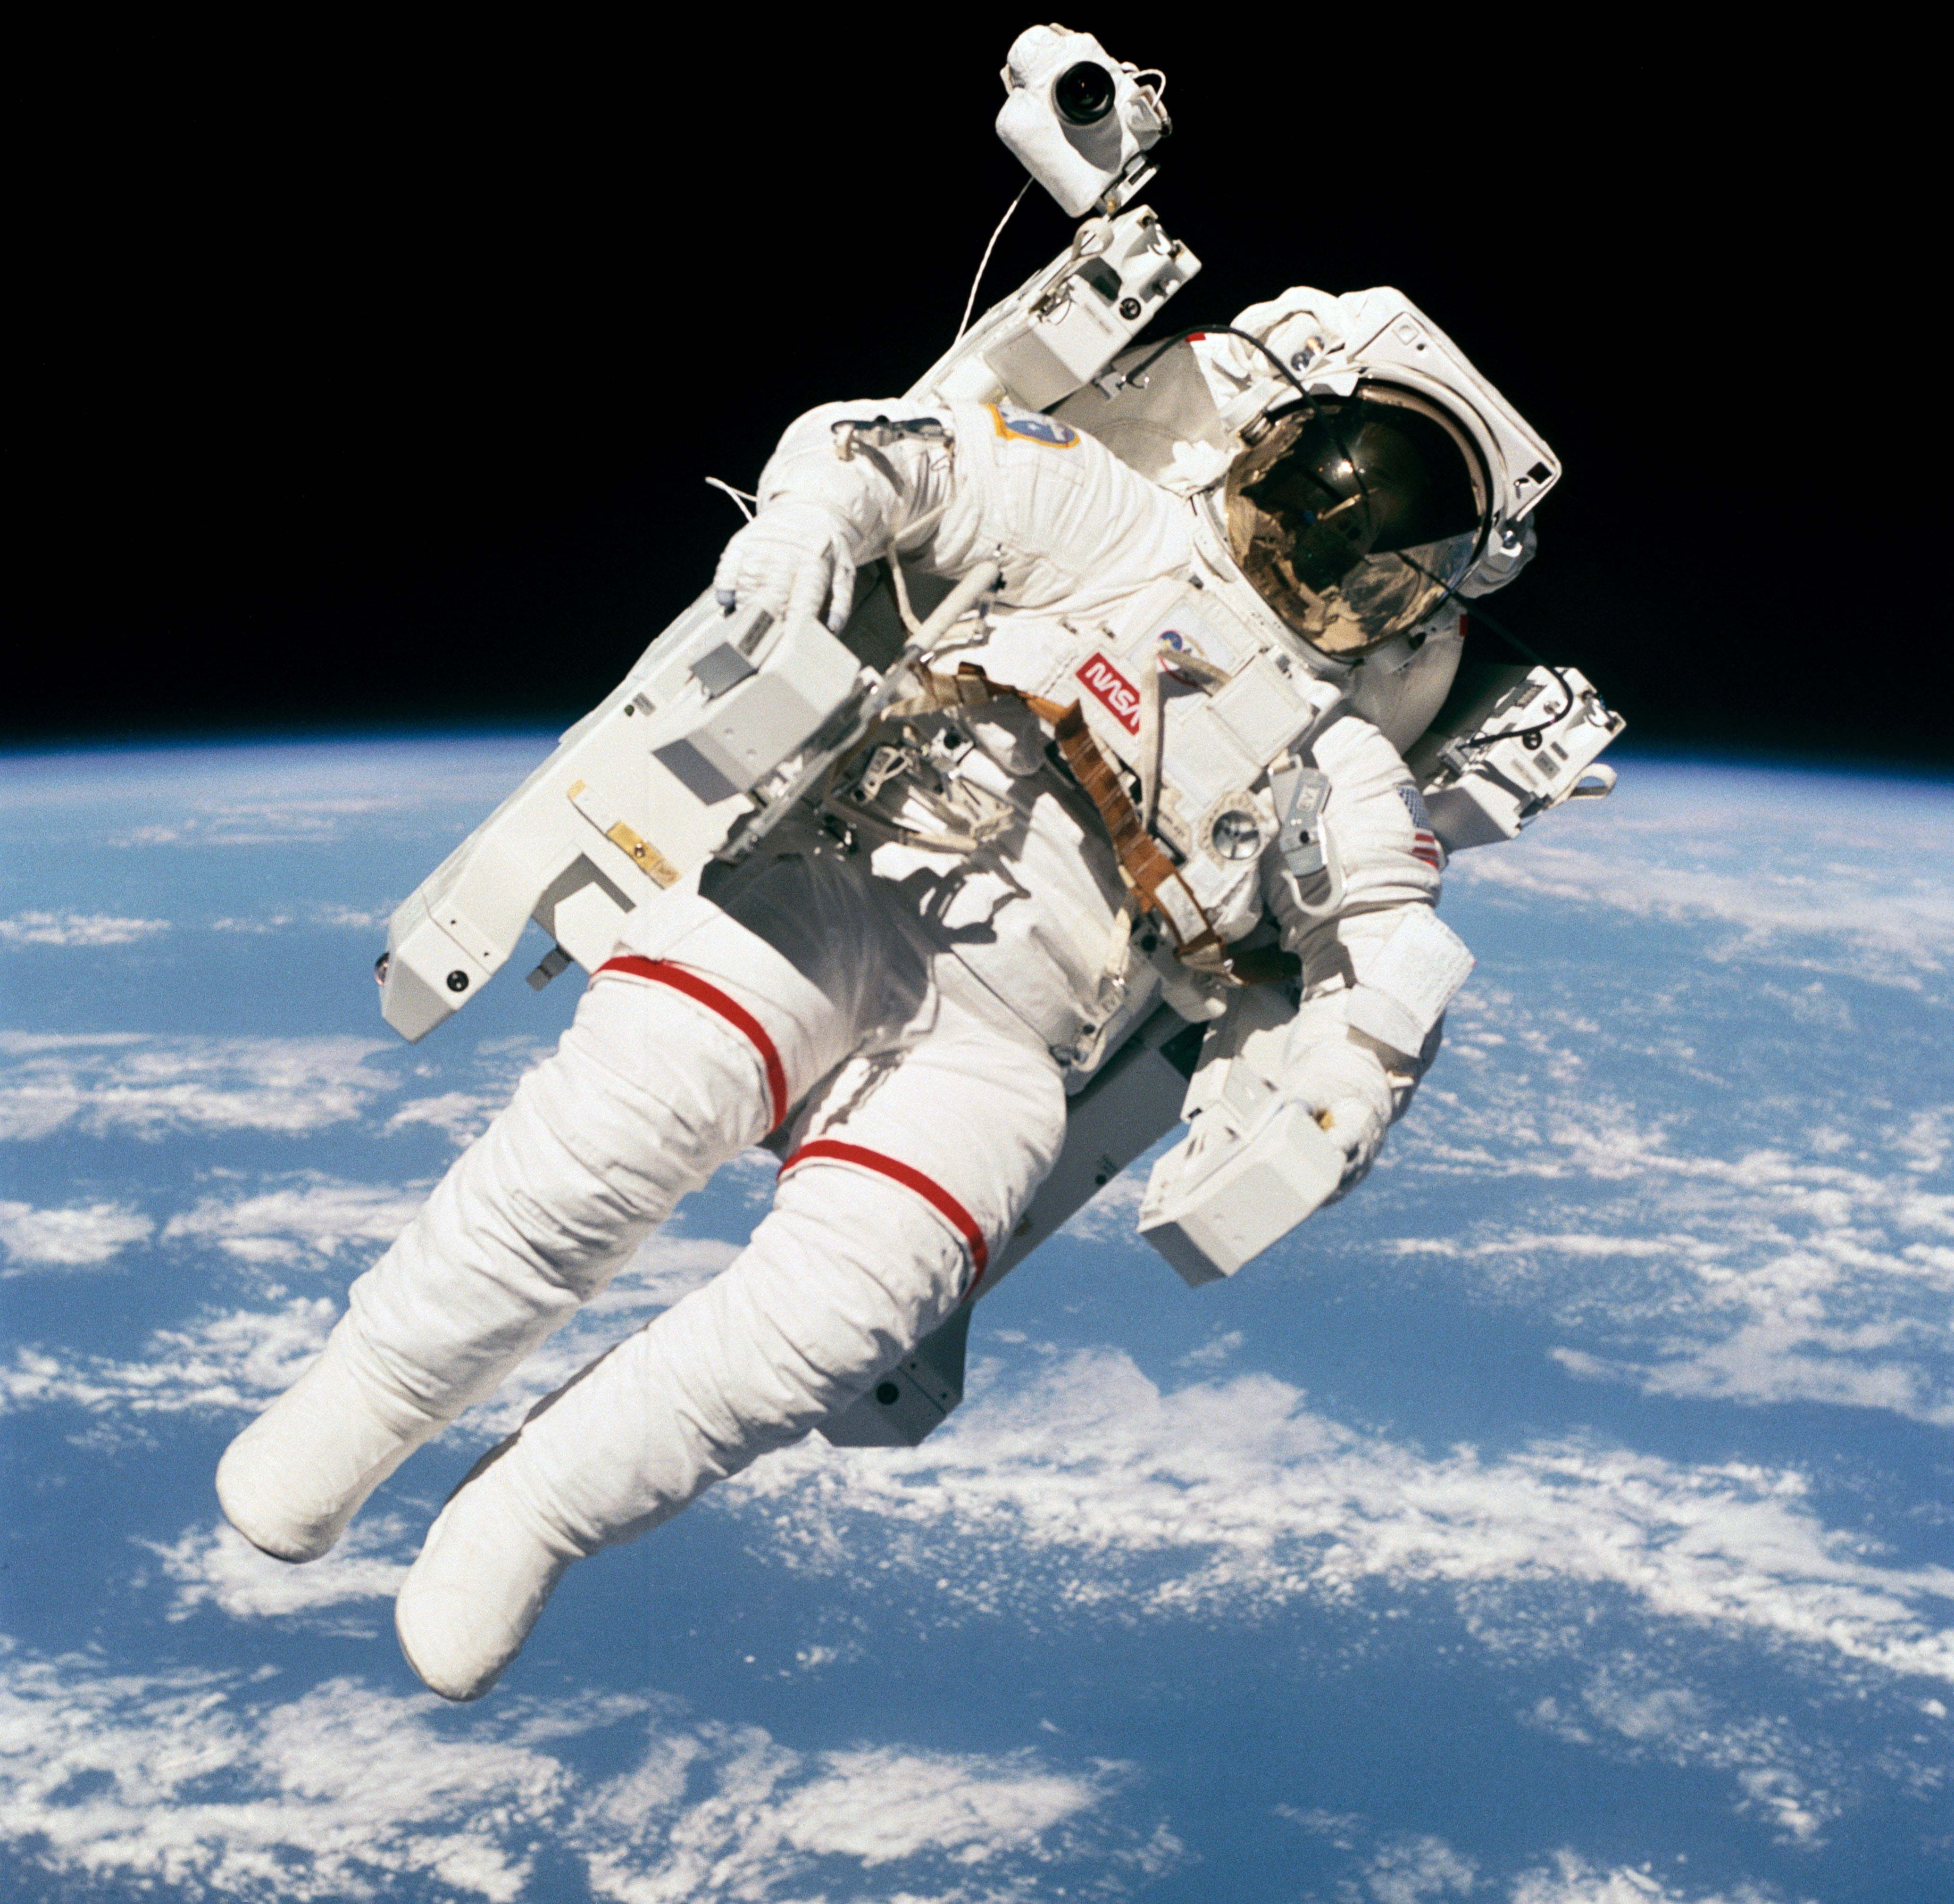 Look, mum! No tethers. NASA astronaut Bruce McCandless during the historic untethered spacewalk.